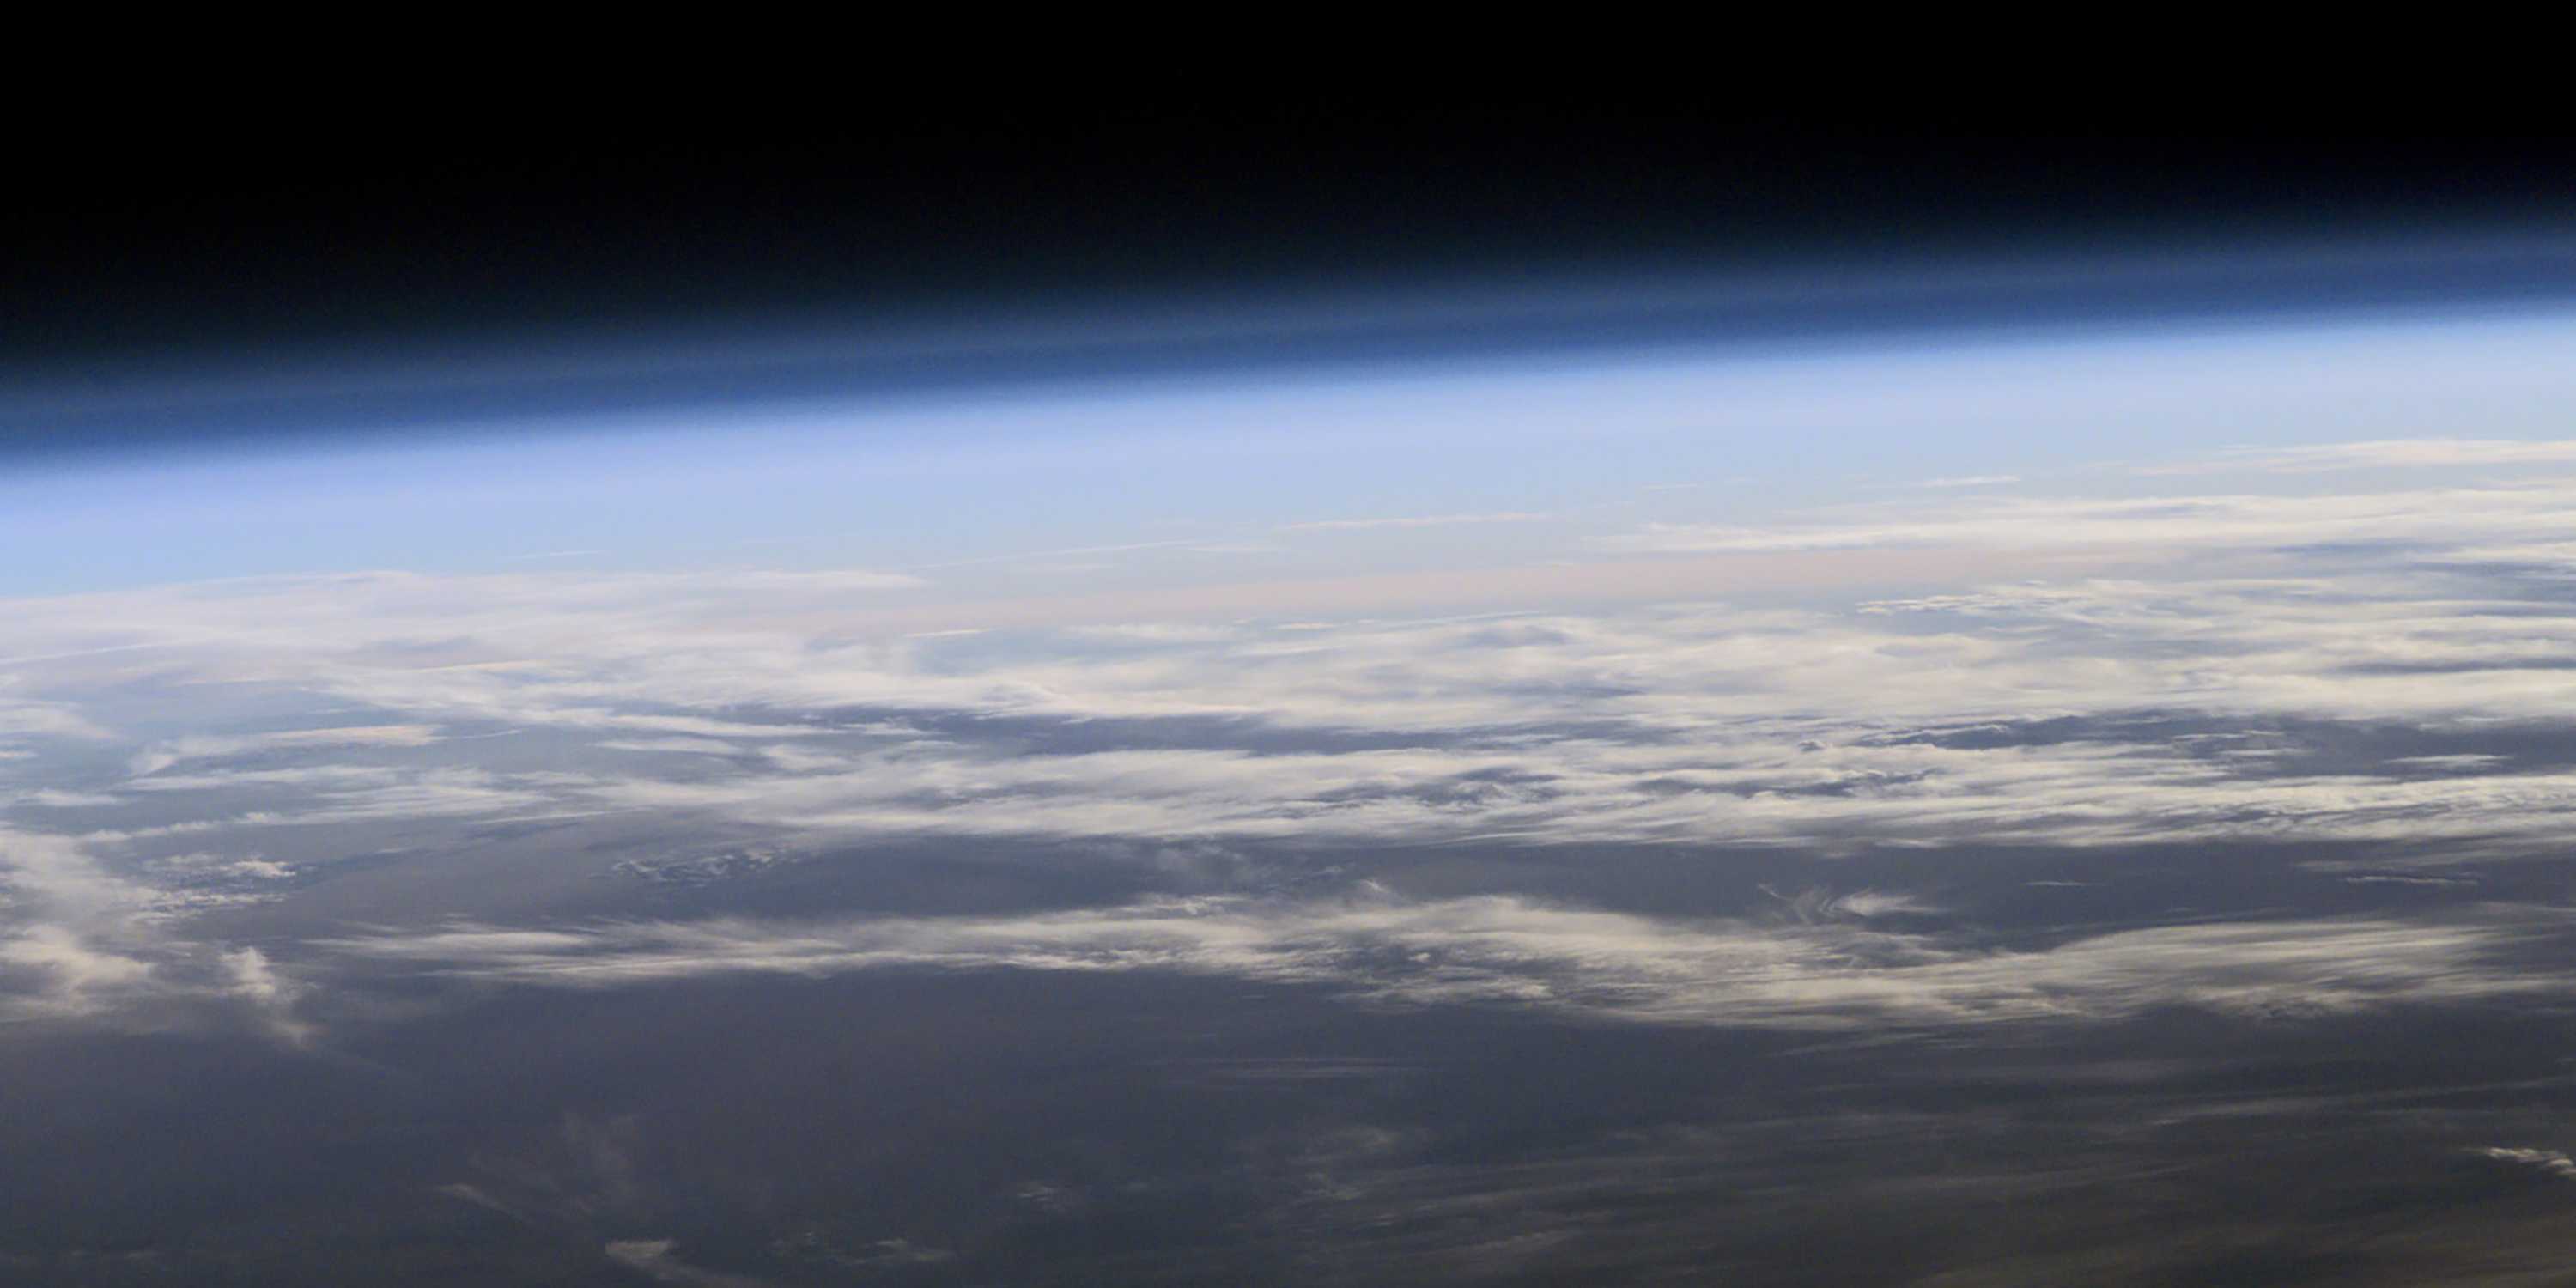 The Earth's ozone layer seen from space